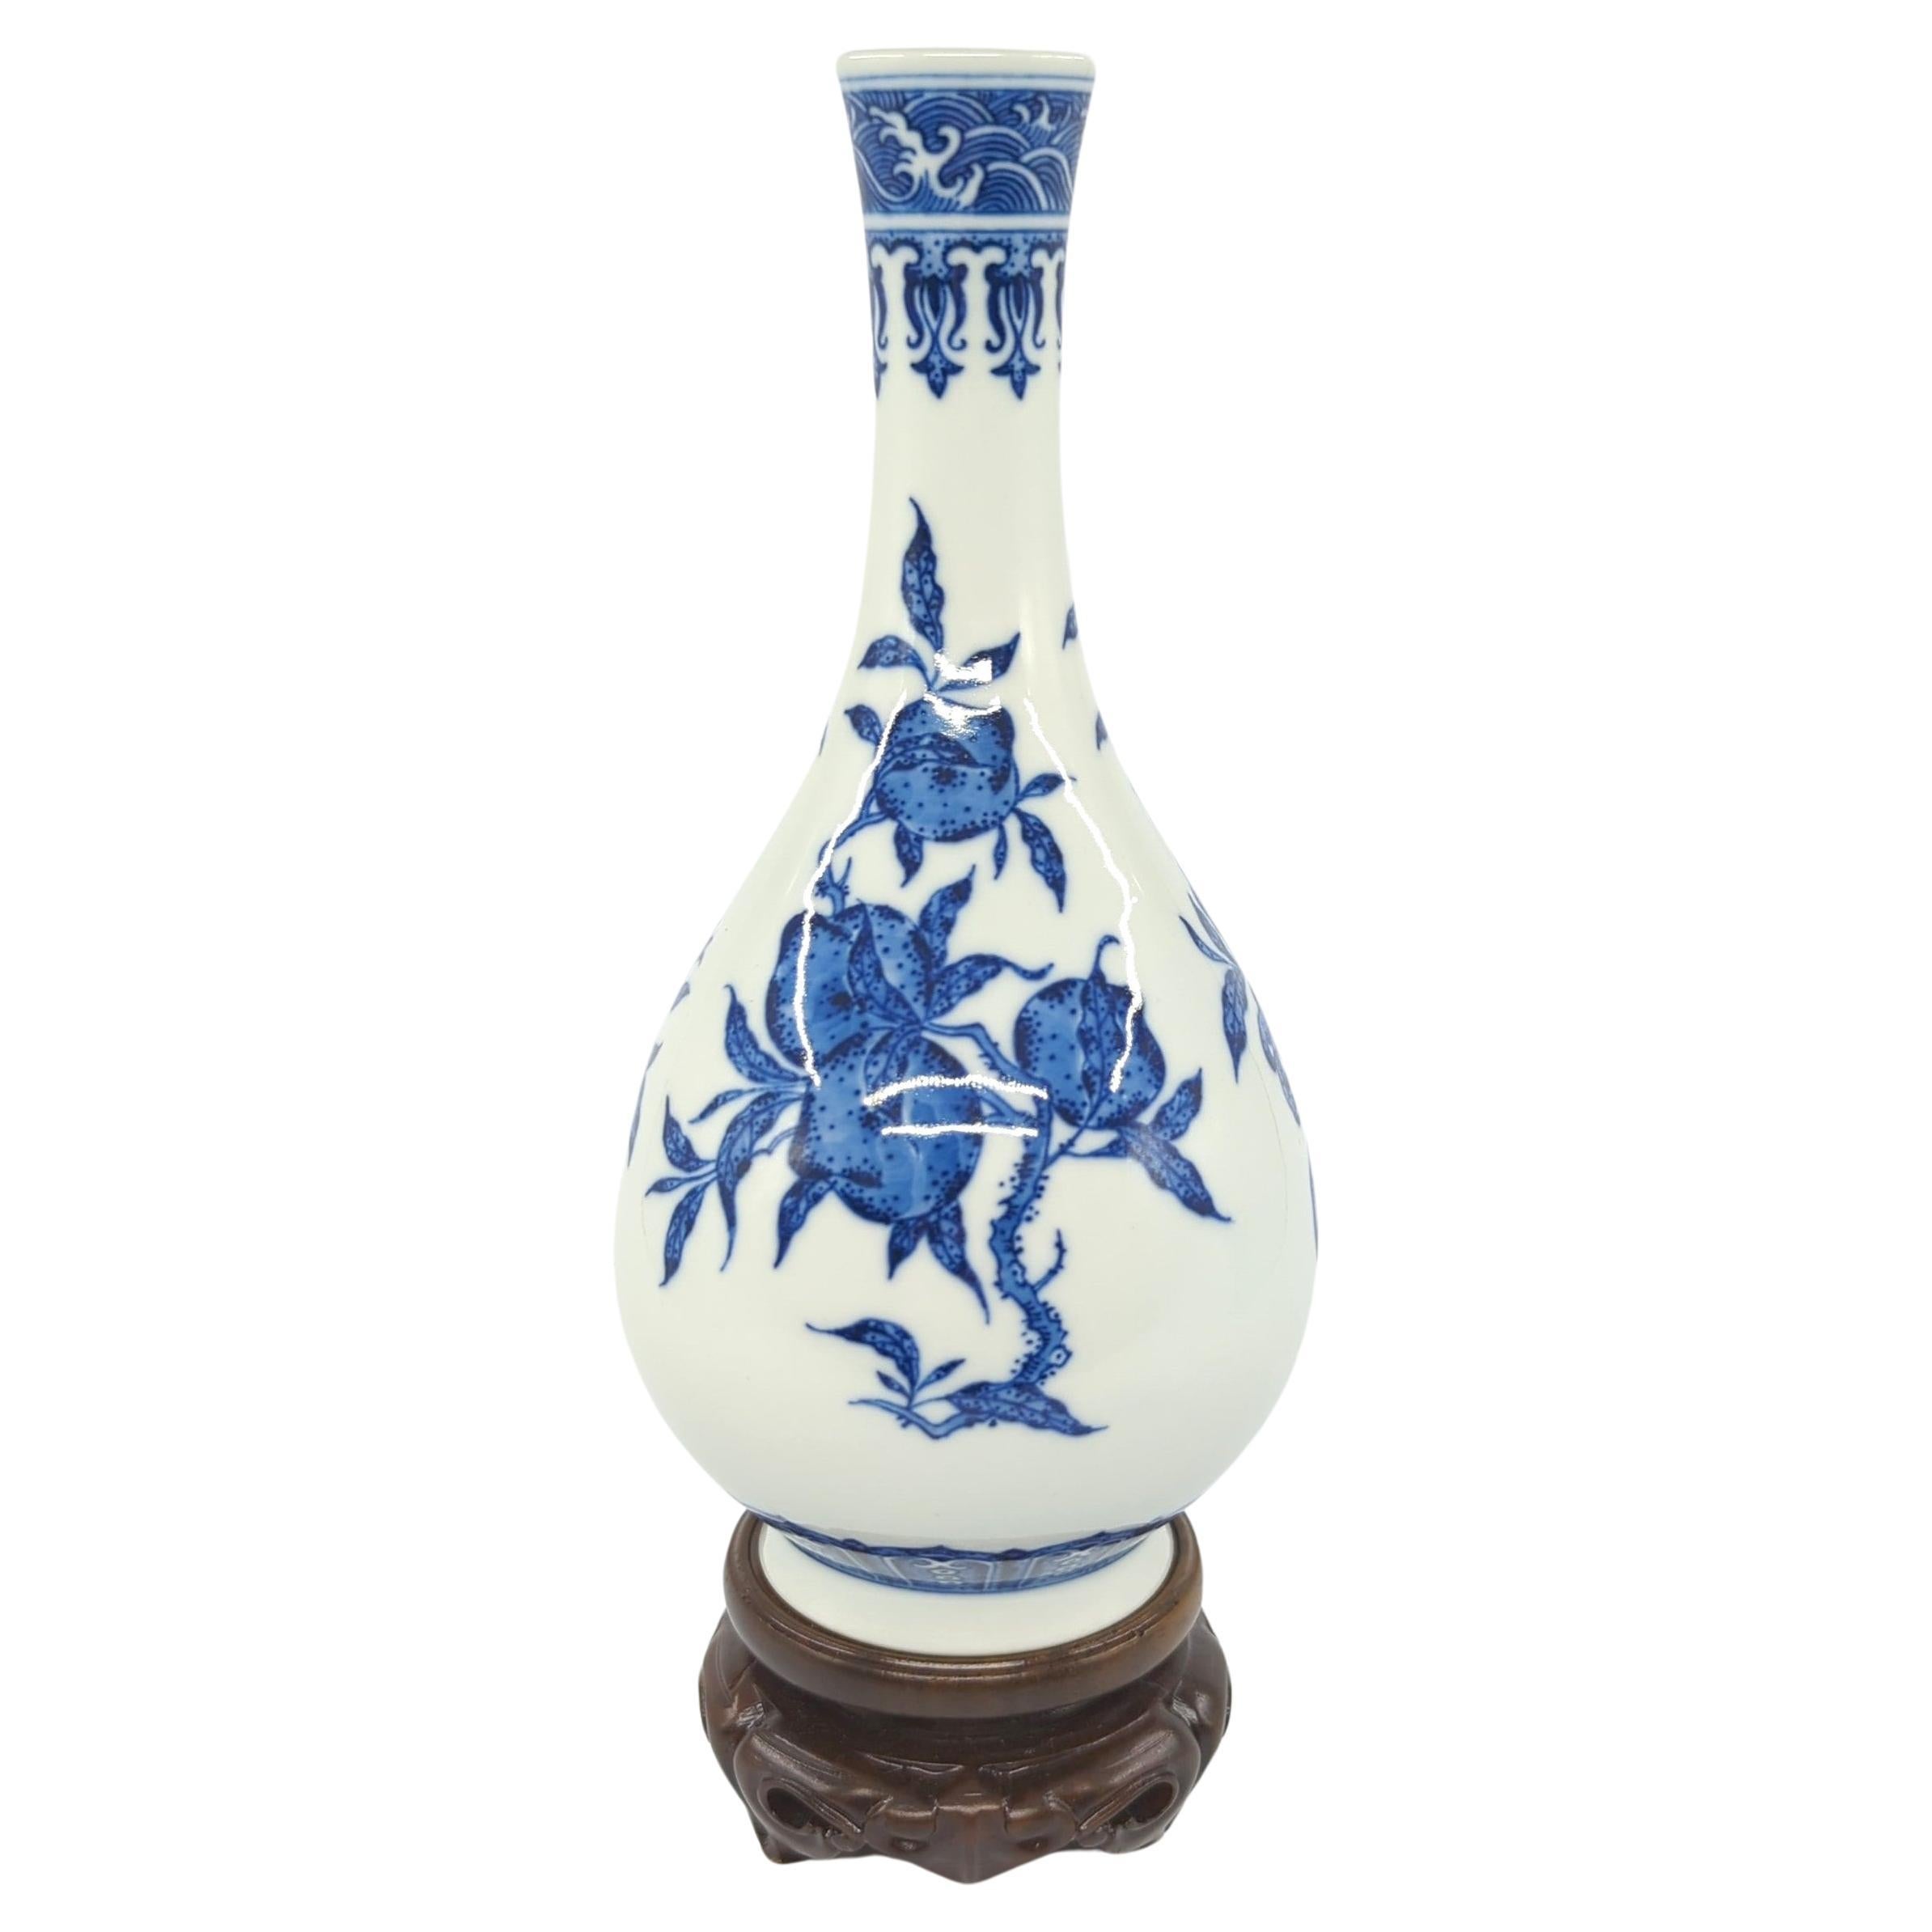 This meticulously crafted Chinese porcelain vase is an exemplary piece of Qing style BW, adorned in underglaze blue and white. The vase assumes a classic bottle form, subtly enhanced by a slightly outward flaring mouth rim.

The central design